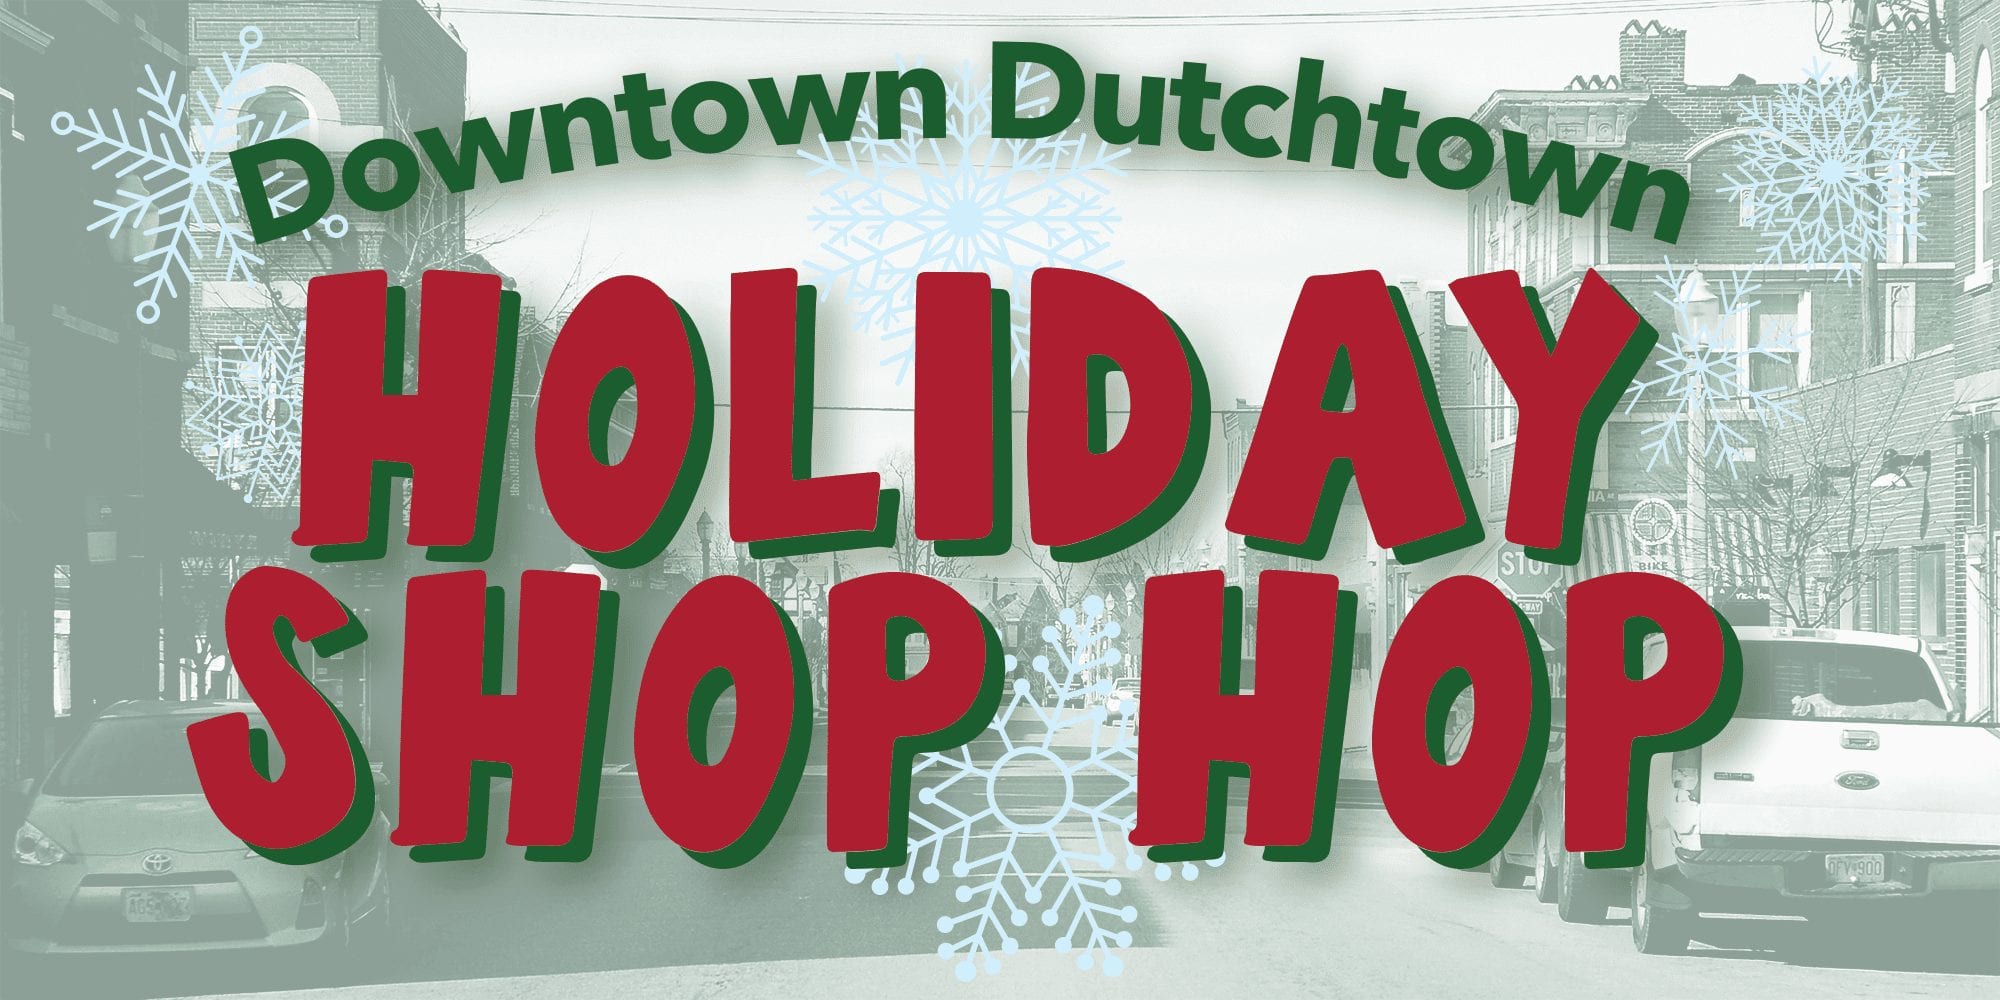 Downtown Dutchtown Holiday Shop Hop